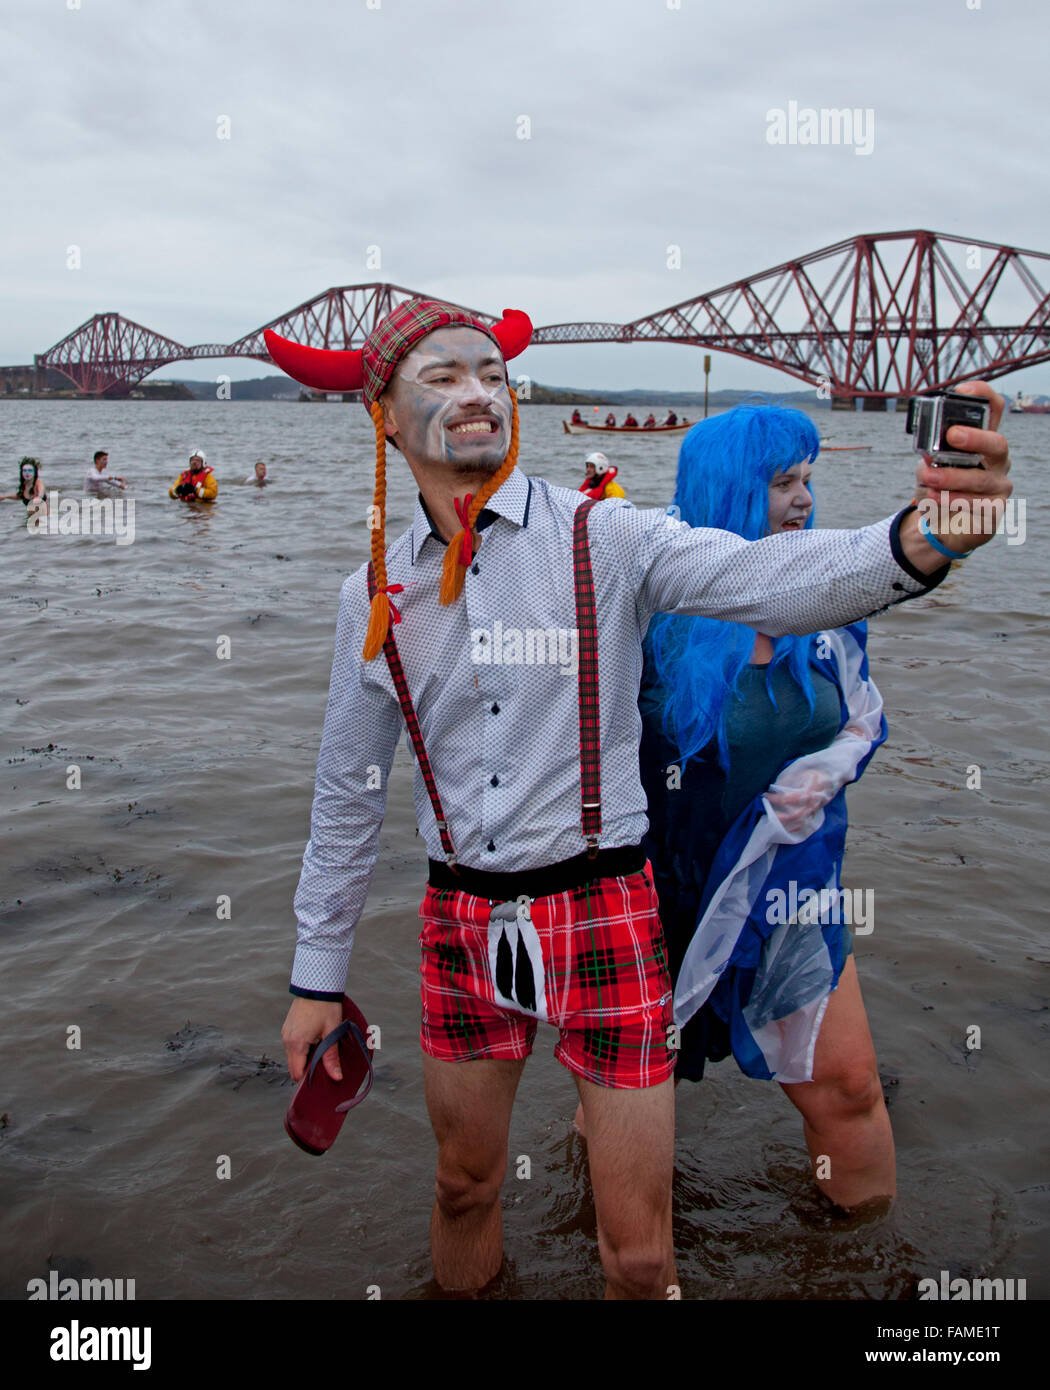 South Queensferry, Edinburgh, Scotland UK. 01 January 2016. Queensferry Loony Dook, the annual dip in the River Forth in the shadow of the world-famous Forth Rail Bridge. Takes place on the third day of the Edinburgh Hogmany New Year celebrations. The weather was fair but chilly between 2-4 degrees but this did not dampen the spirits of these hardy participants. Stock Photo